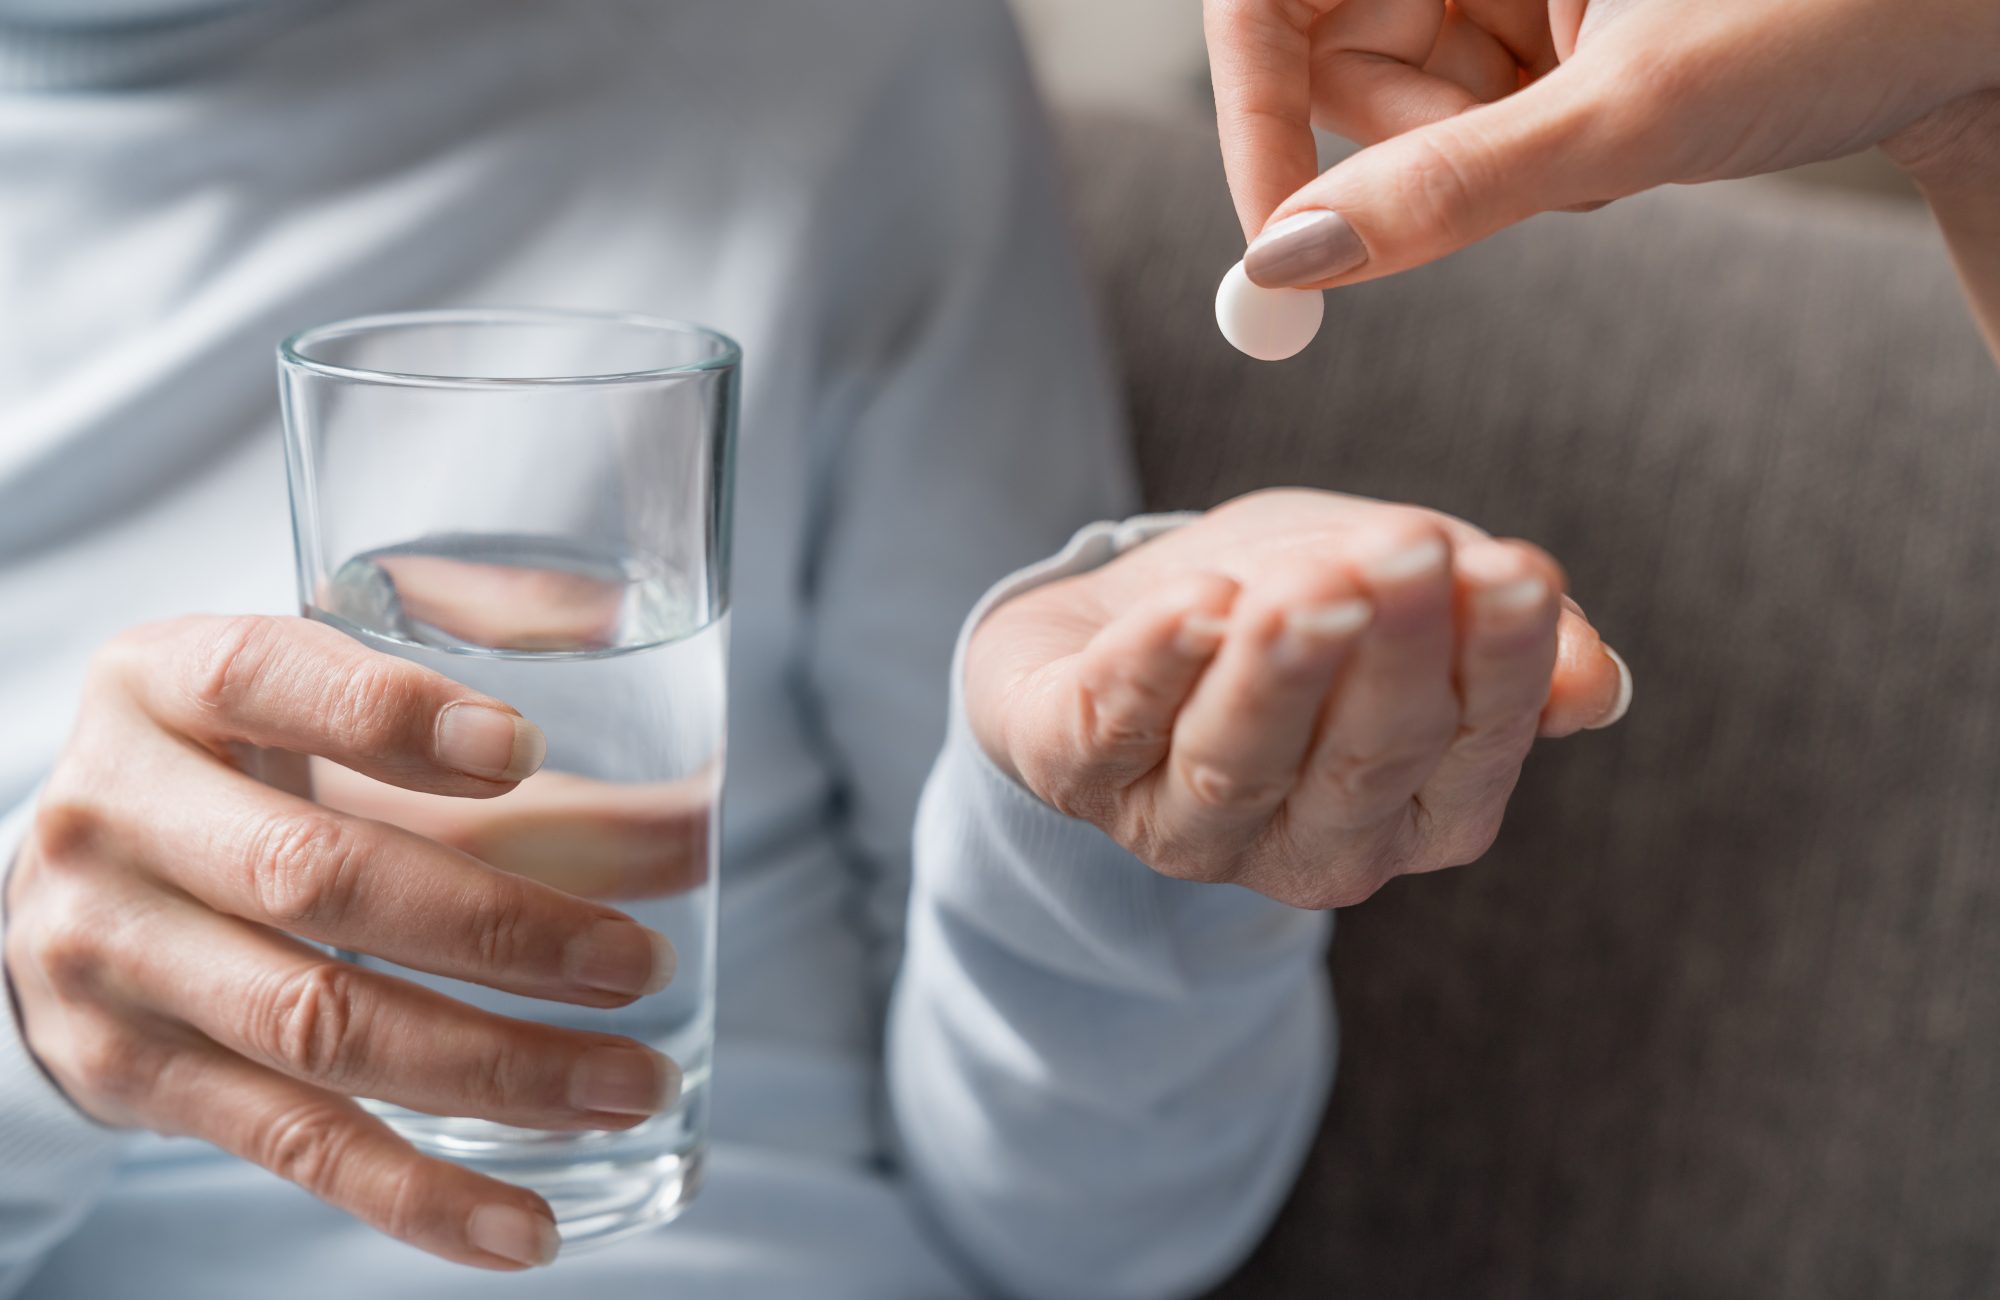 Caring nurse giving pills to senior woman with glass of water in hand